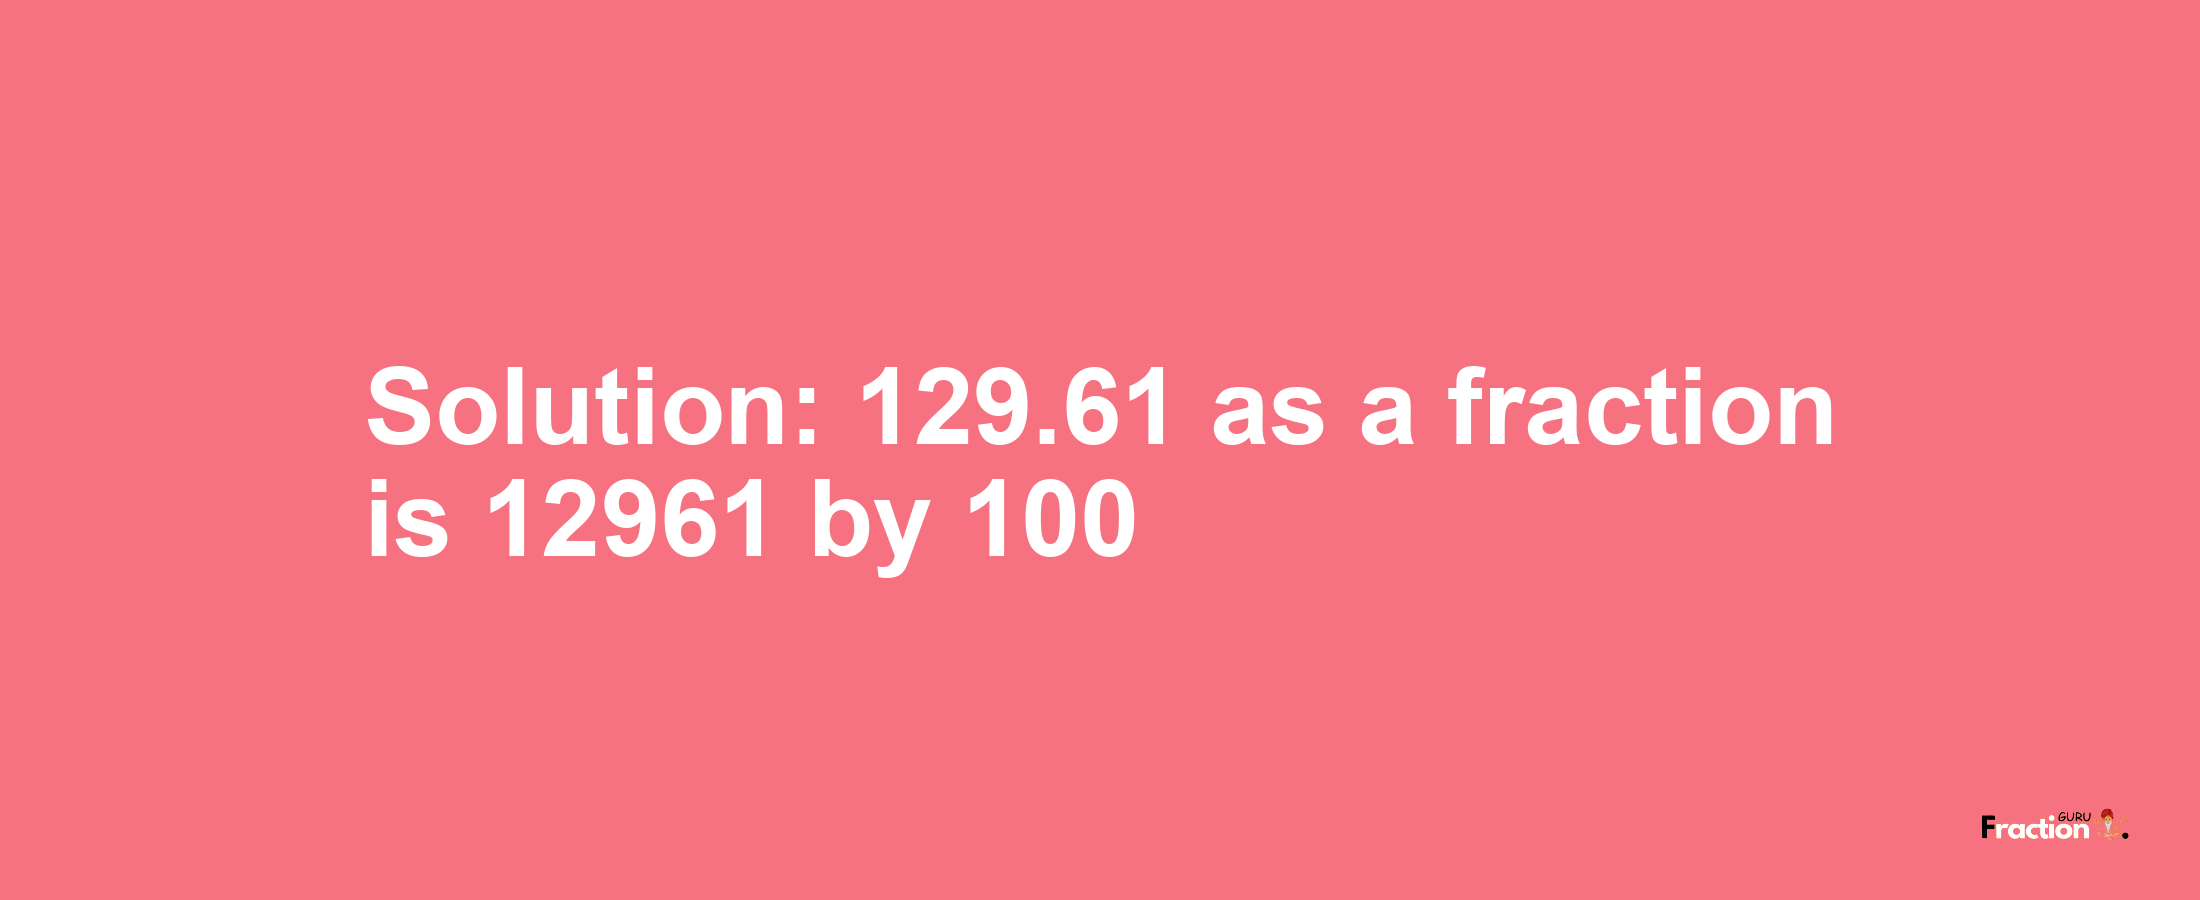 Solution:129.61 as a fraction is 12961/100